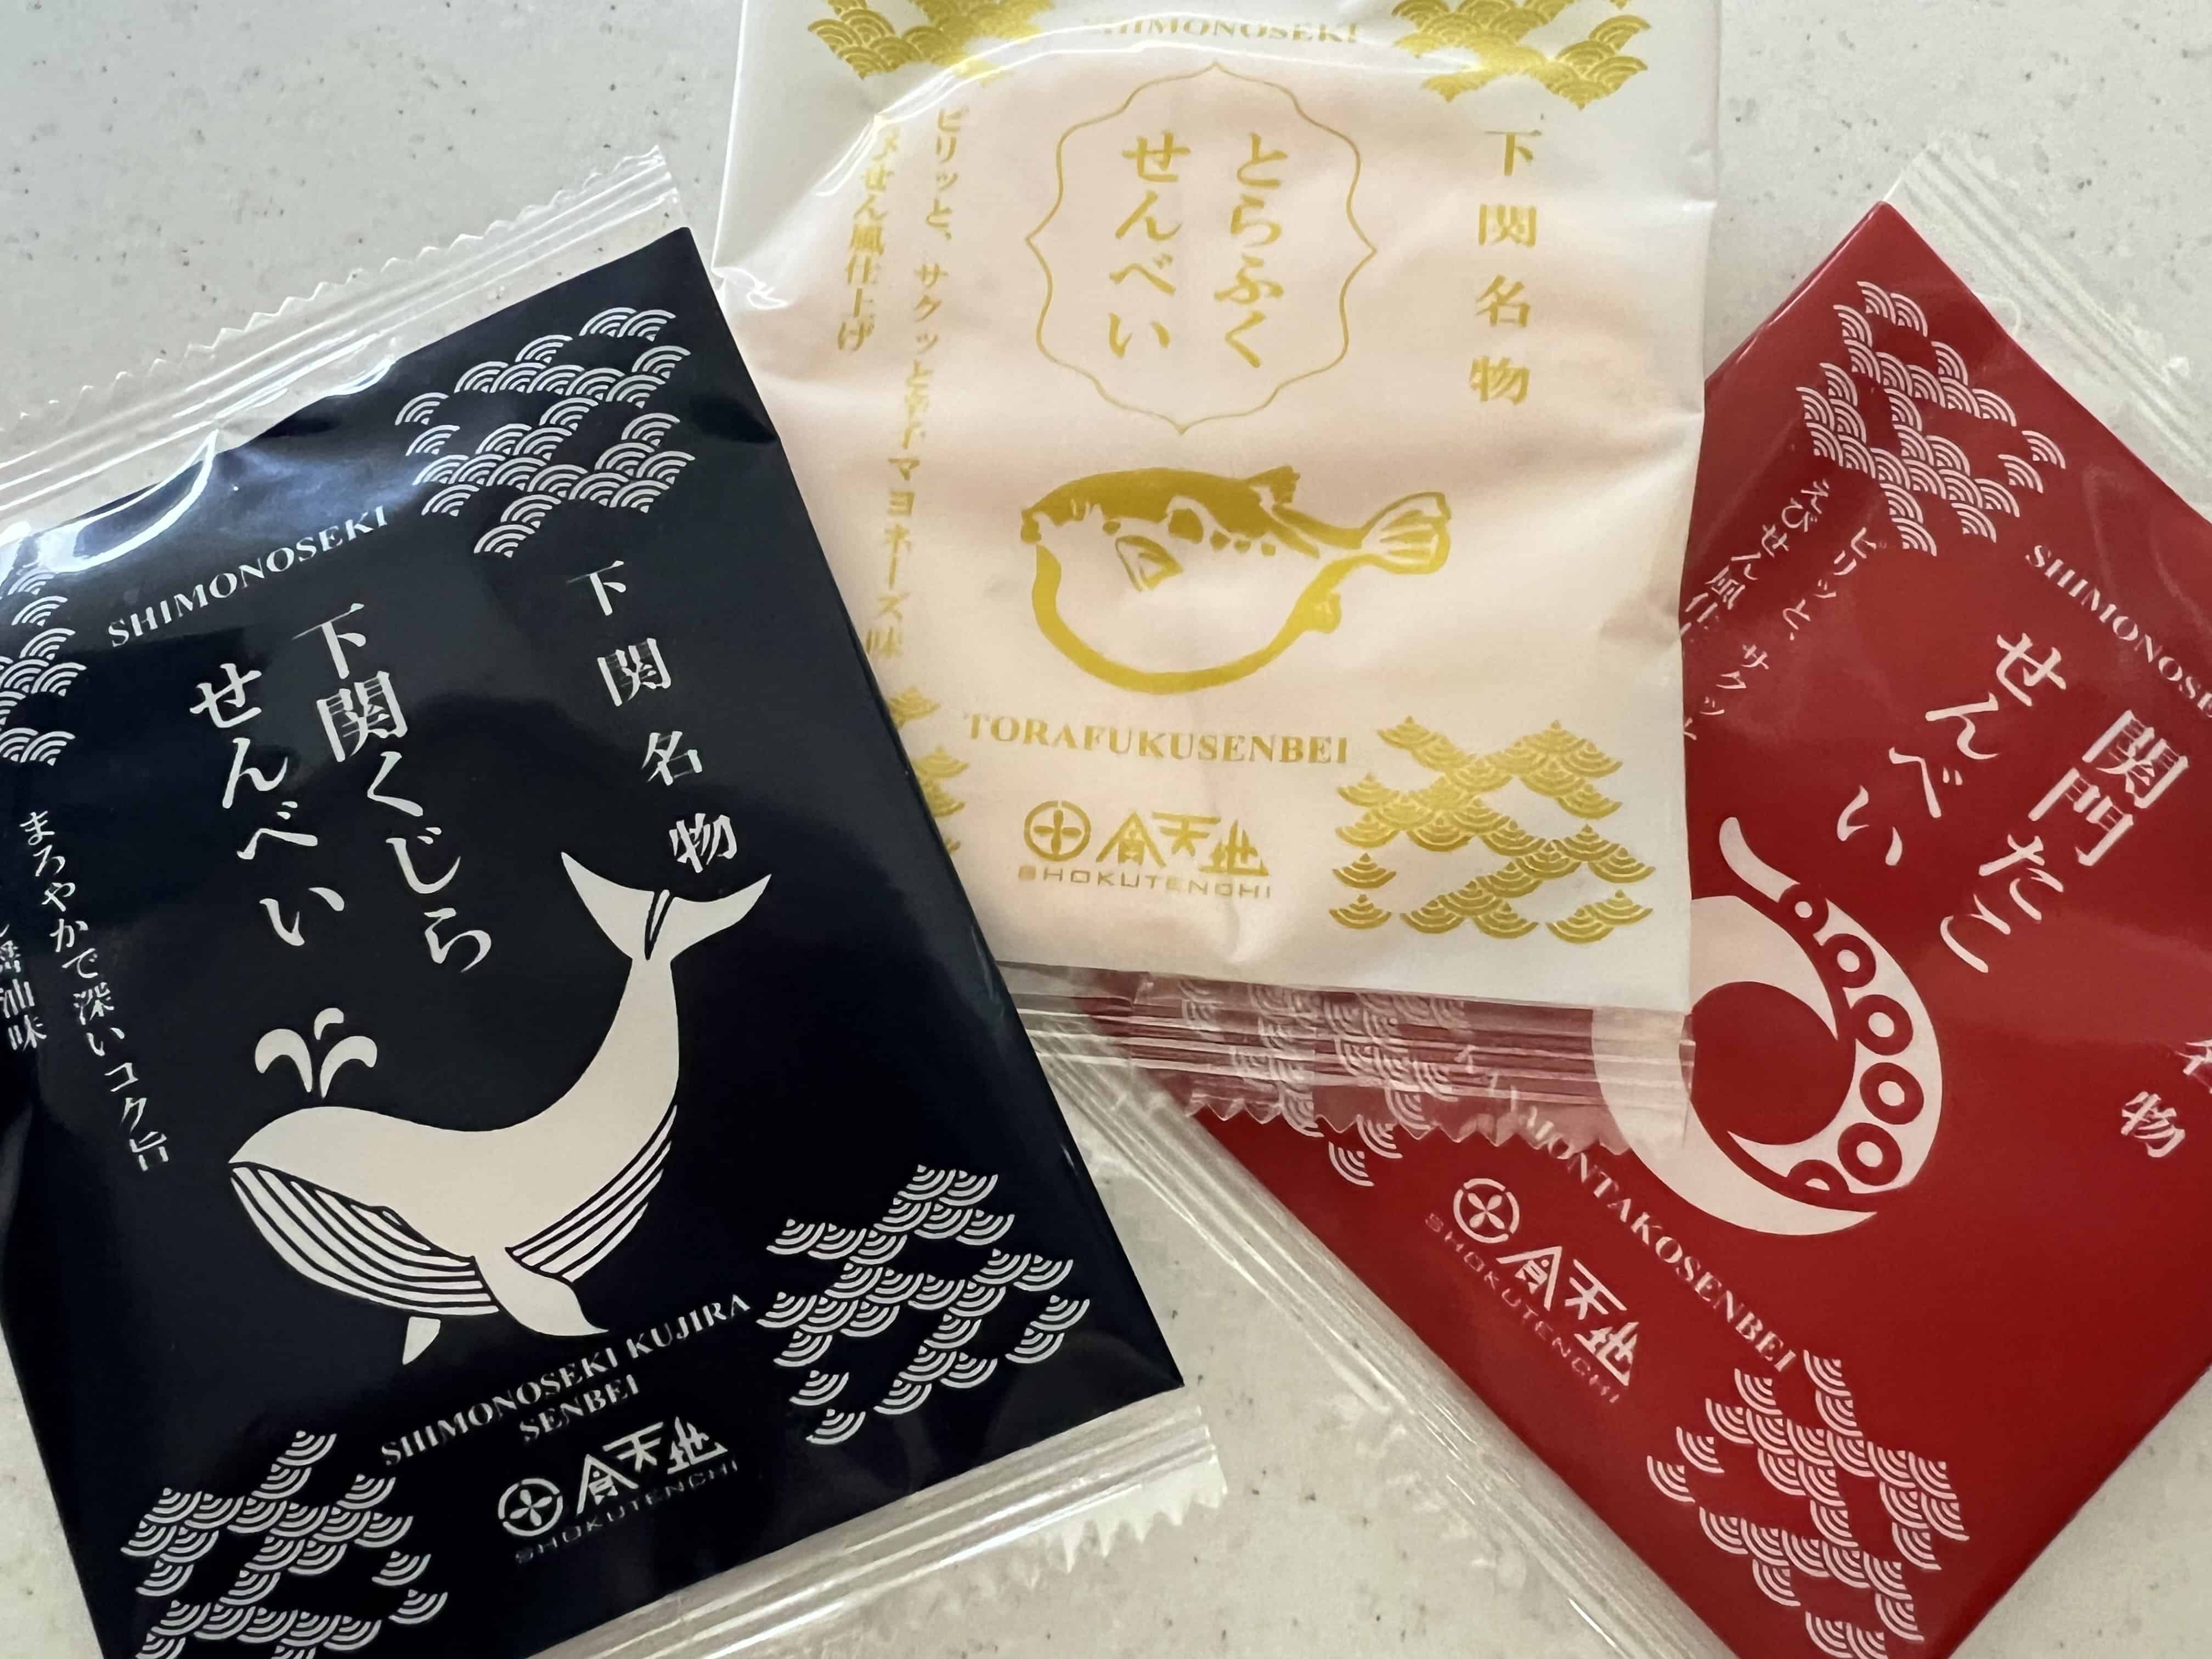 Three packages of rice crackers with drawings of a whale, a blowfish, and an octopus leg on them.